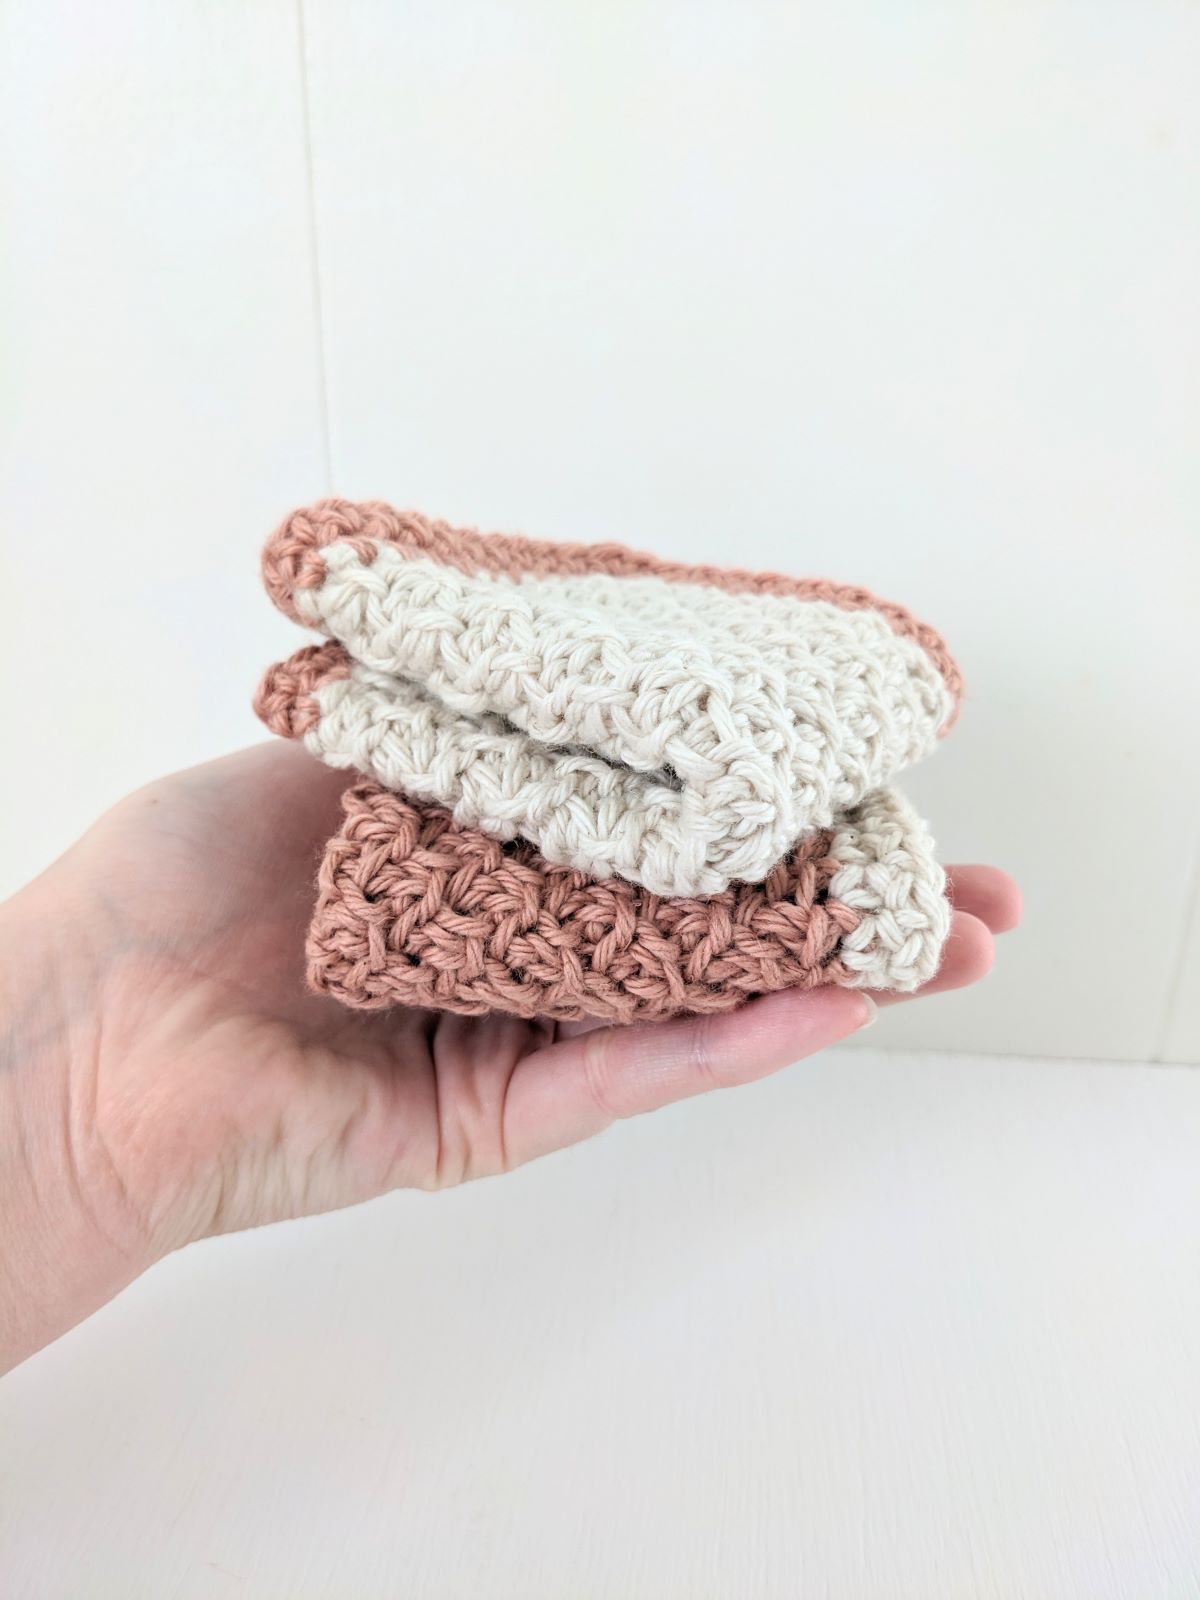 Two folded crochet washcloths that use the honeycomb stitch.